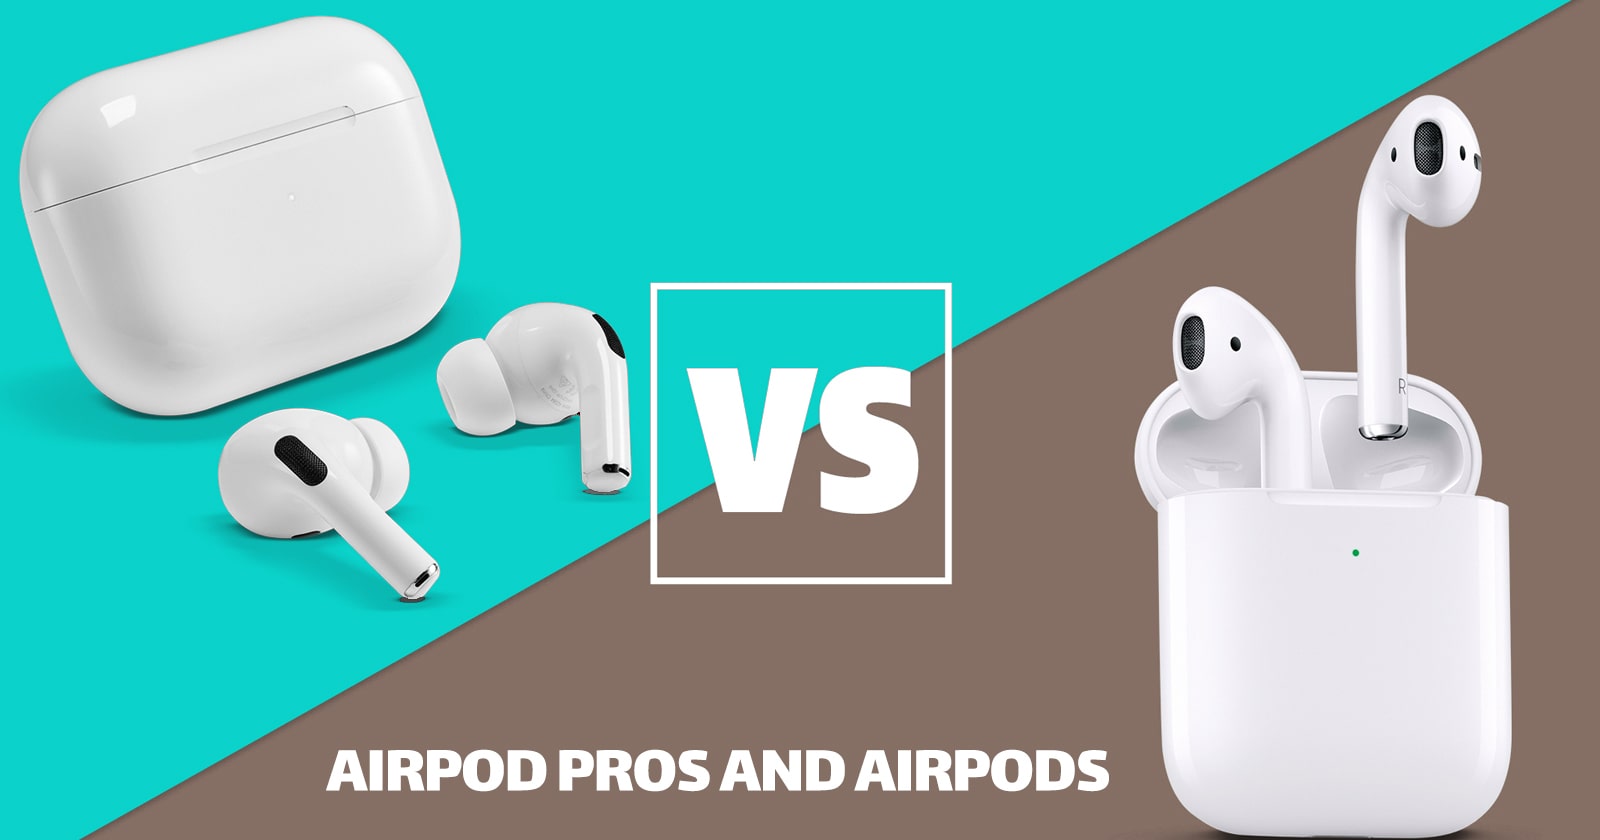 What Is the Difference Between AirPod Pros and AirPods